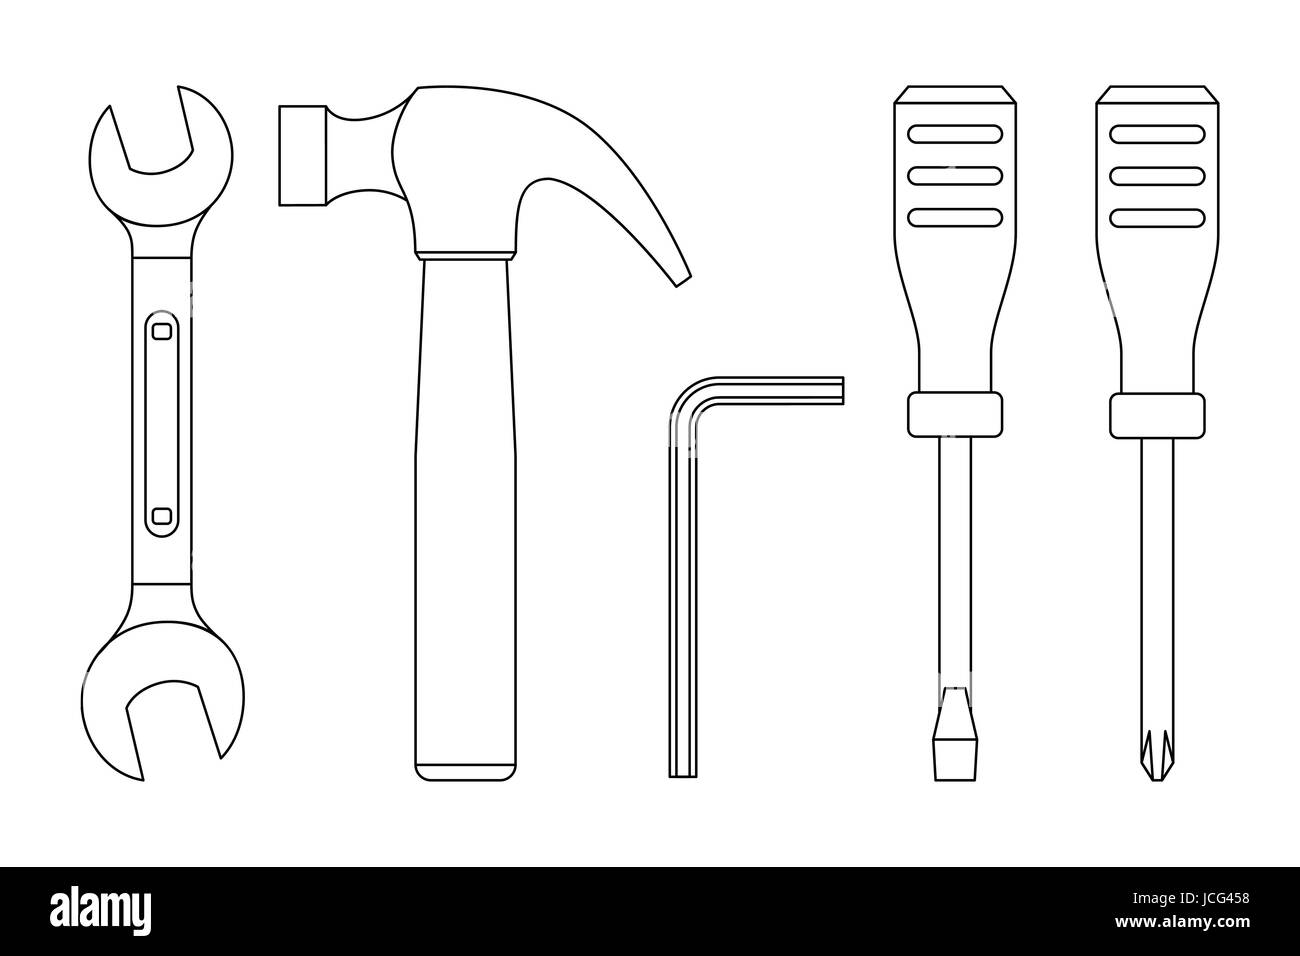 Tools line icons Stock Vector